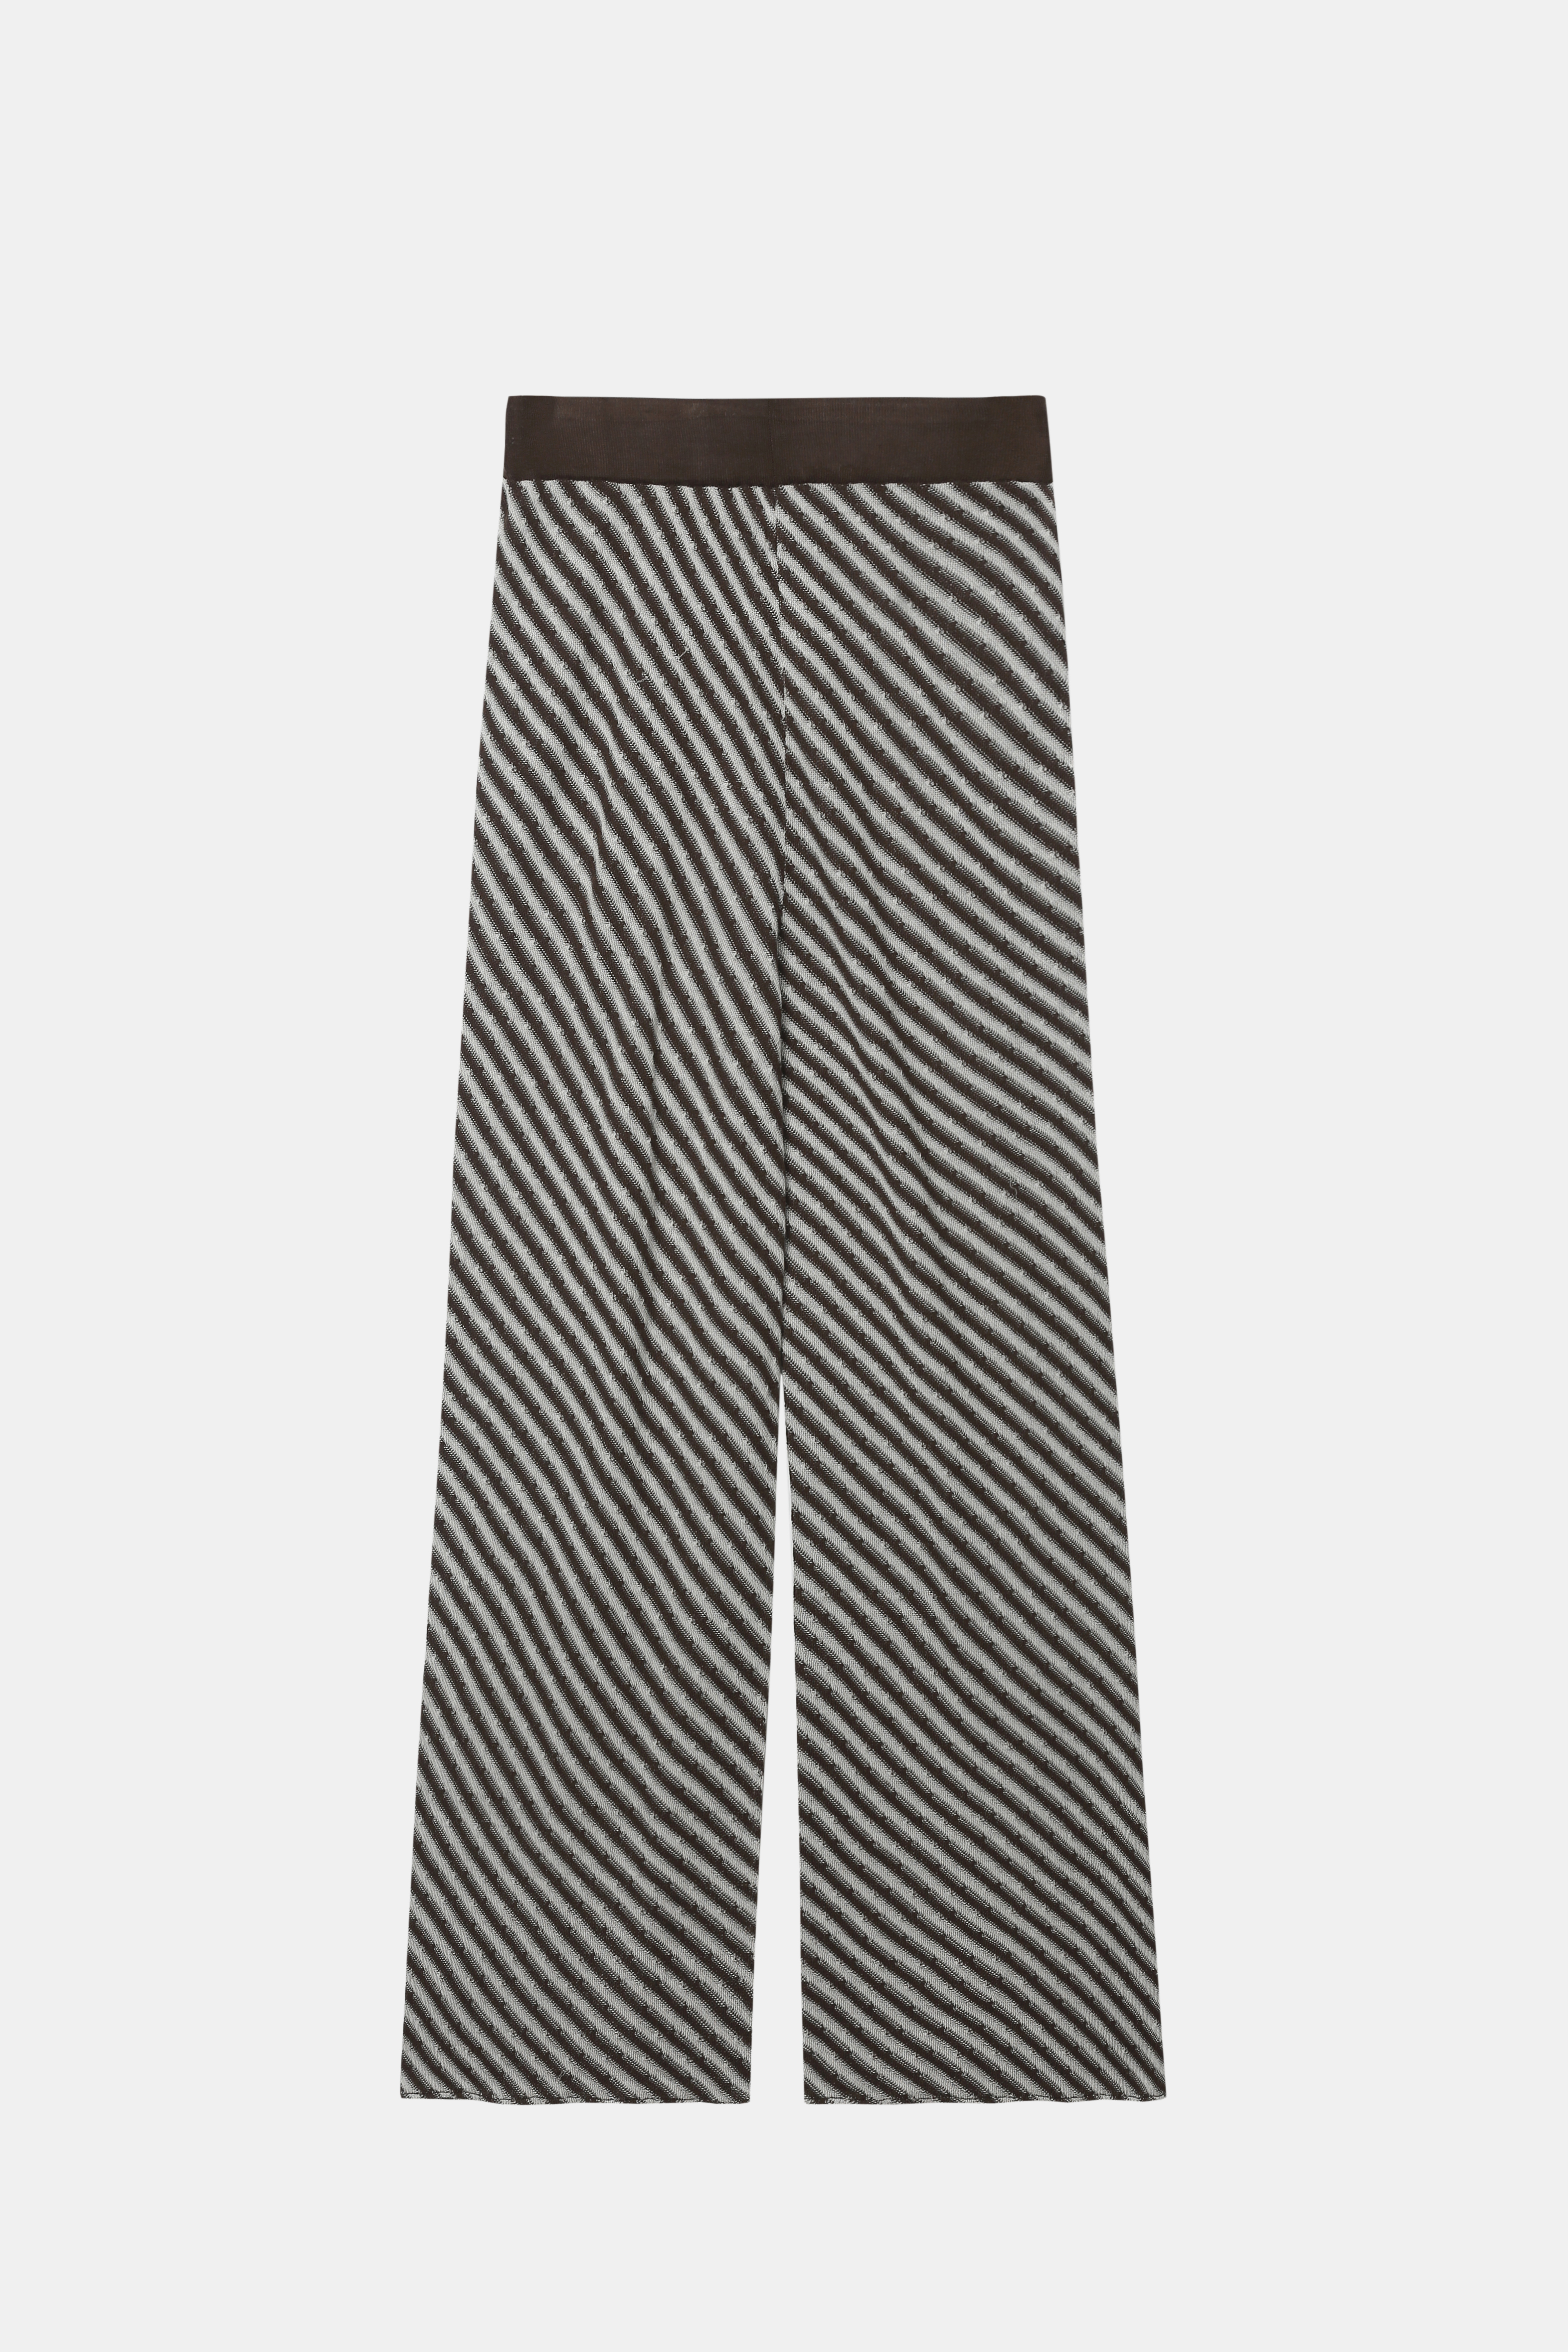 Women's Black And White Striped Wide-leg Pants with Lace-up